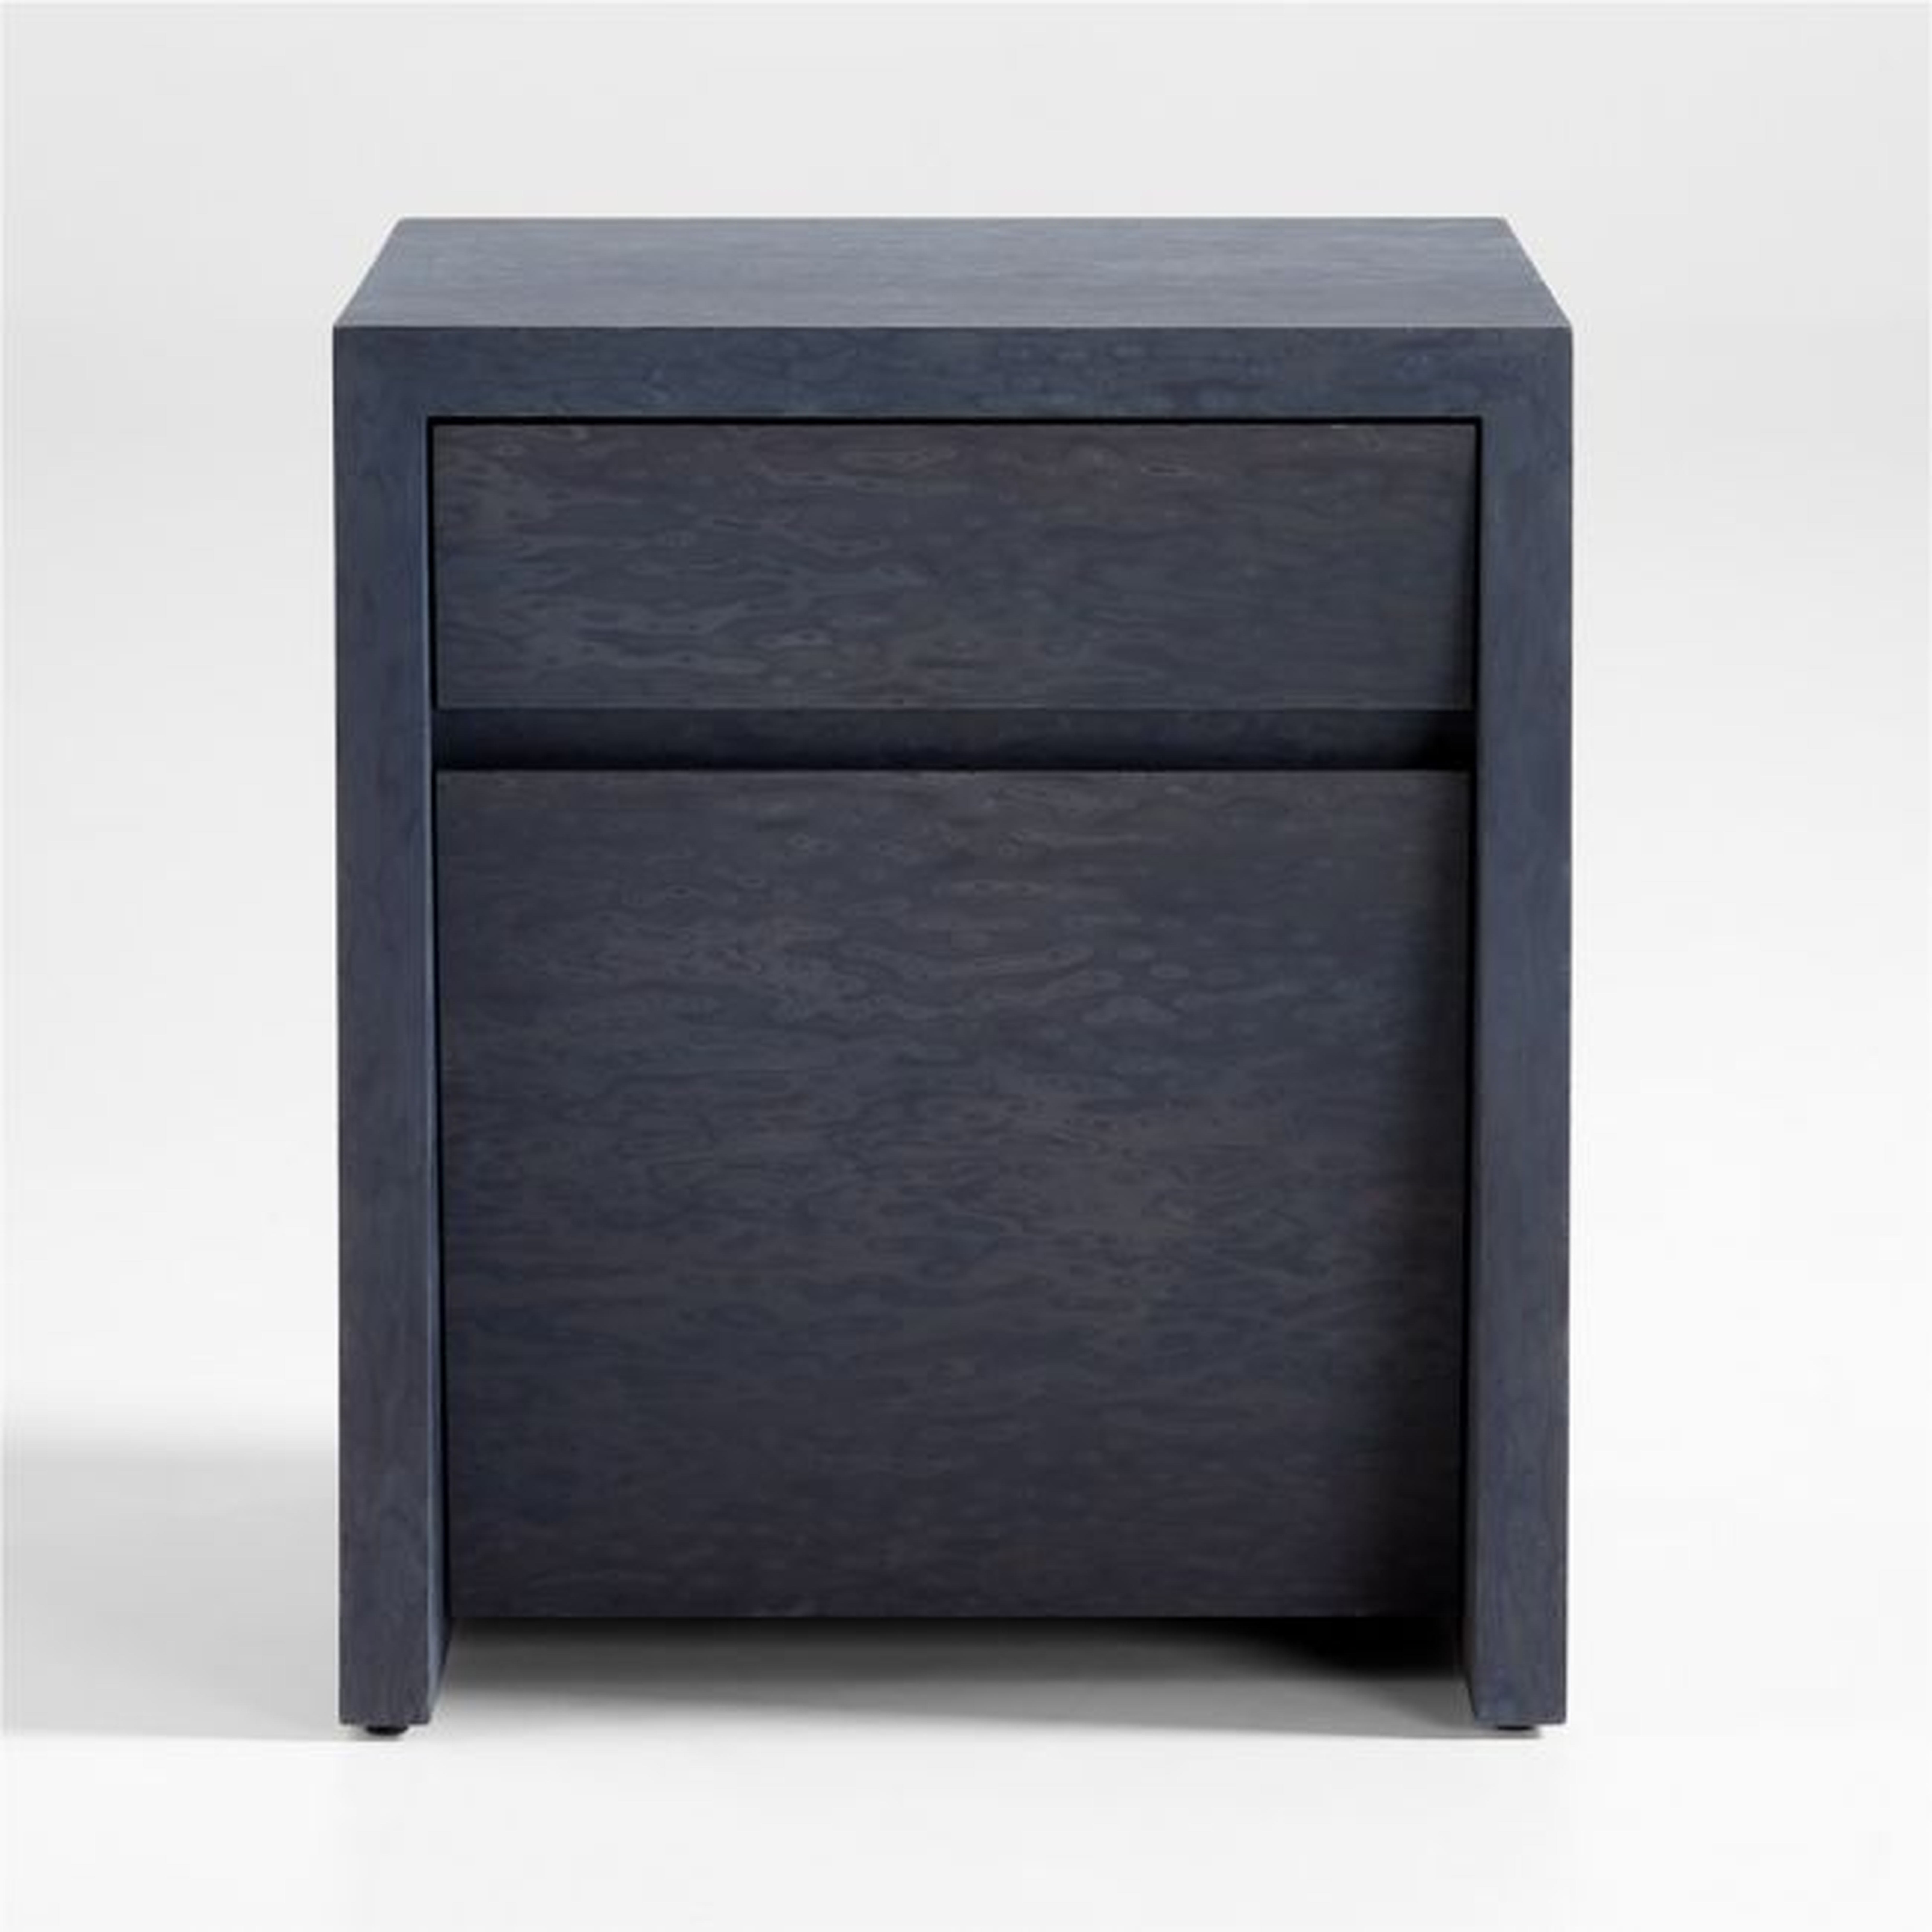 Vander Charcoal Wood Storage End Table - Crate and Barrel